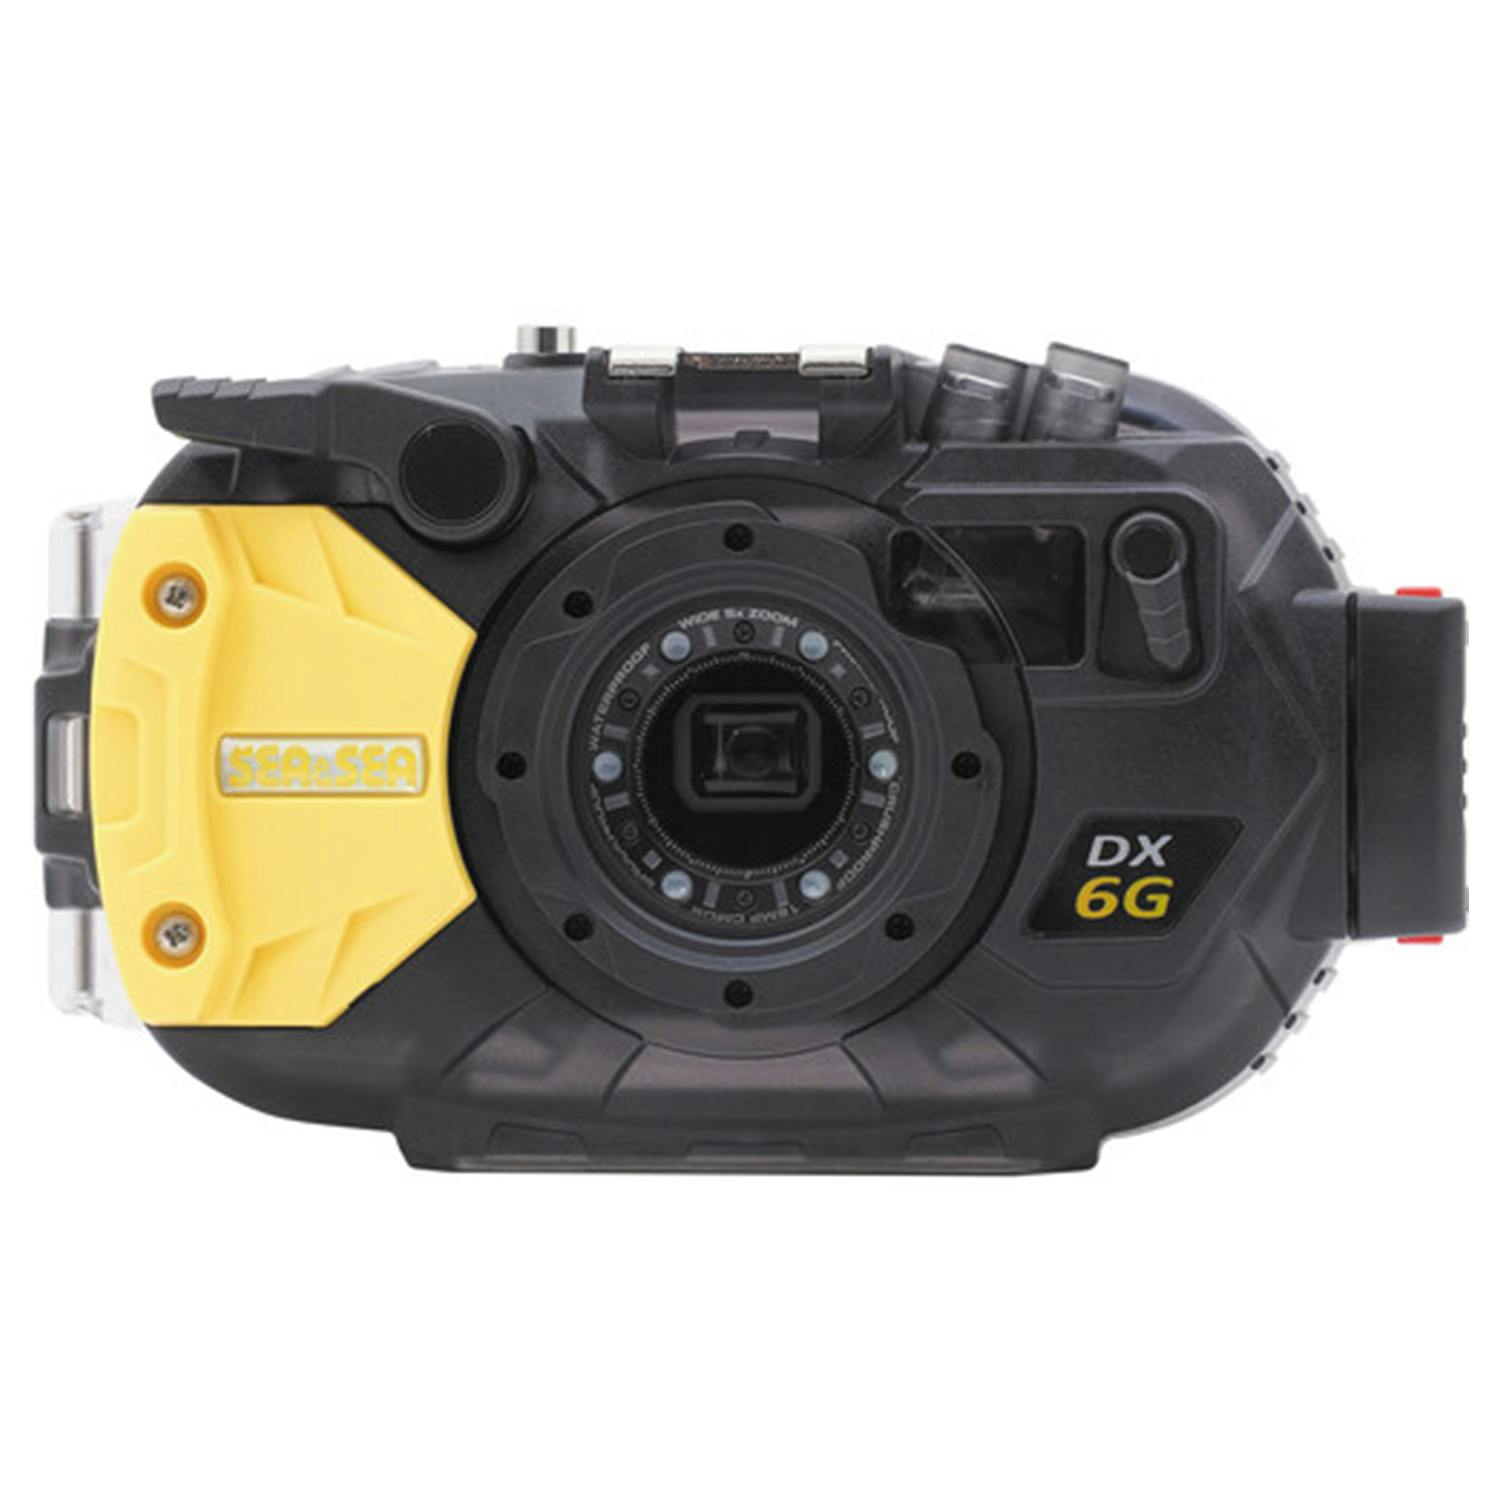 Sea & Sea DX-6G Underwater Camera and Housing Set Closed Front View